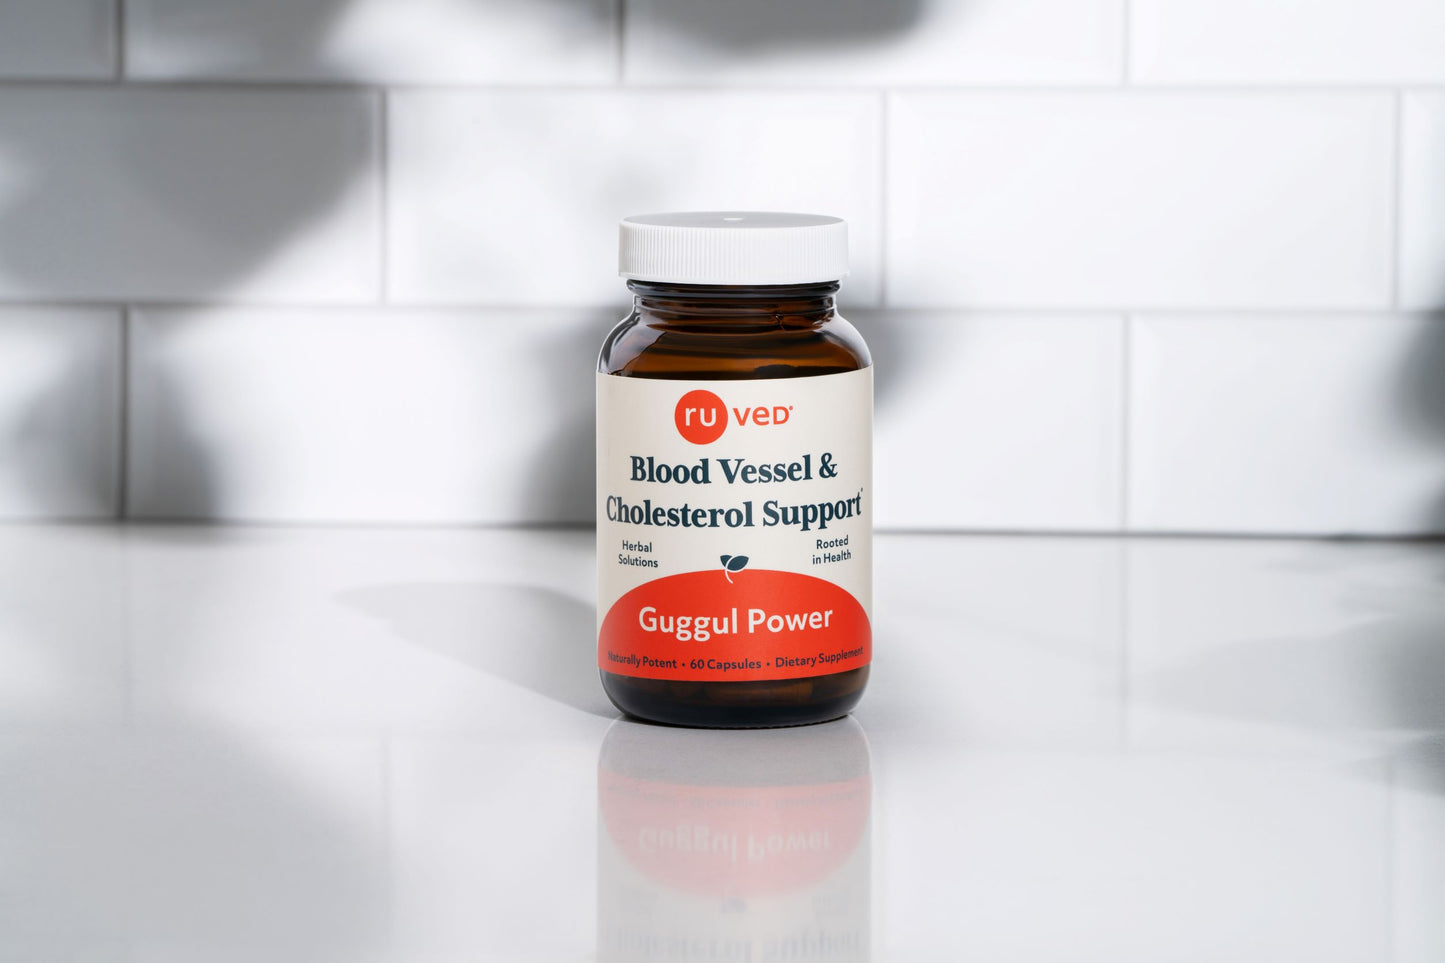 Guggul Power Blood Vessel & Cholesterol Support on Kitchen Counter